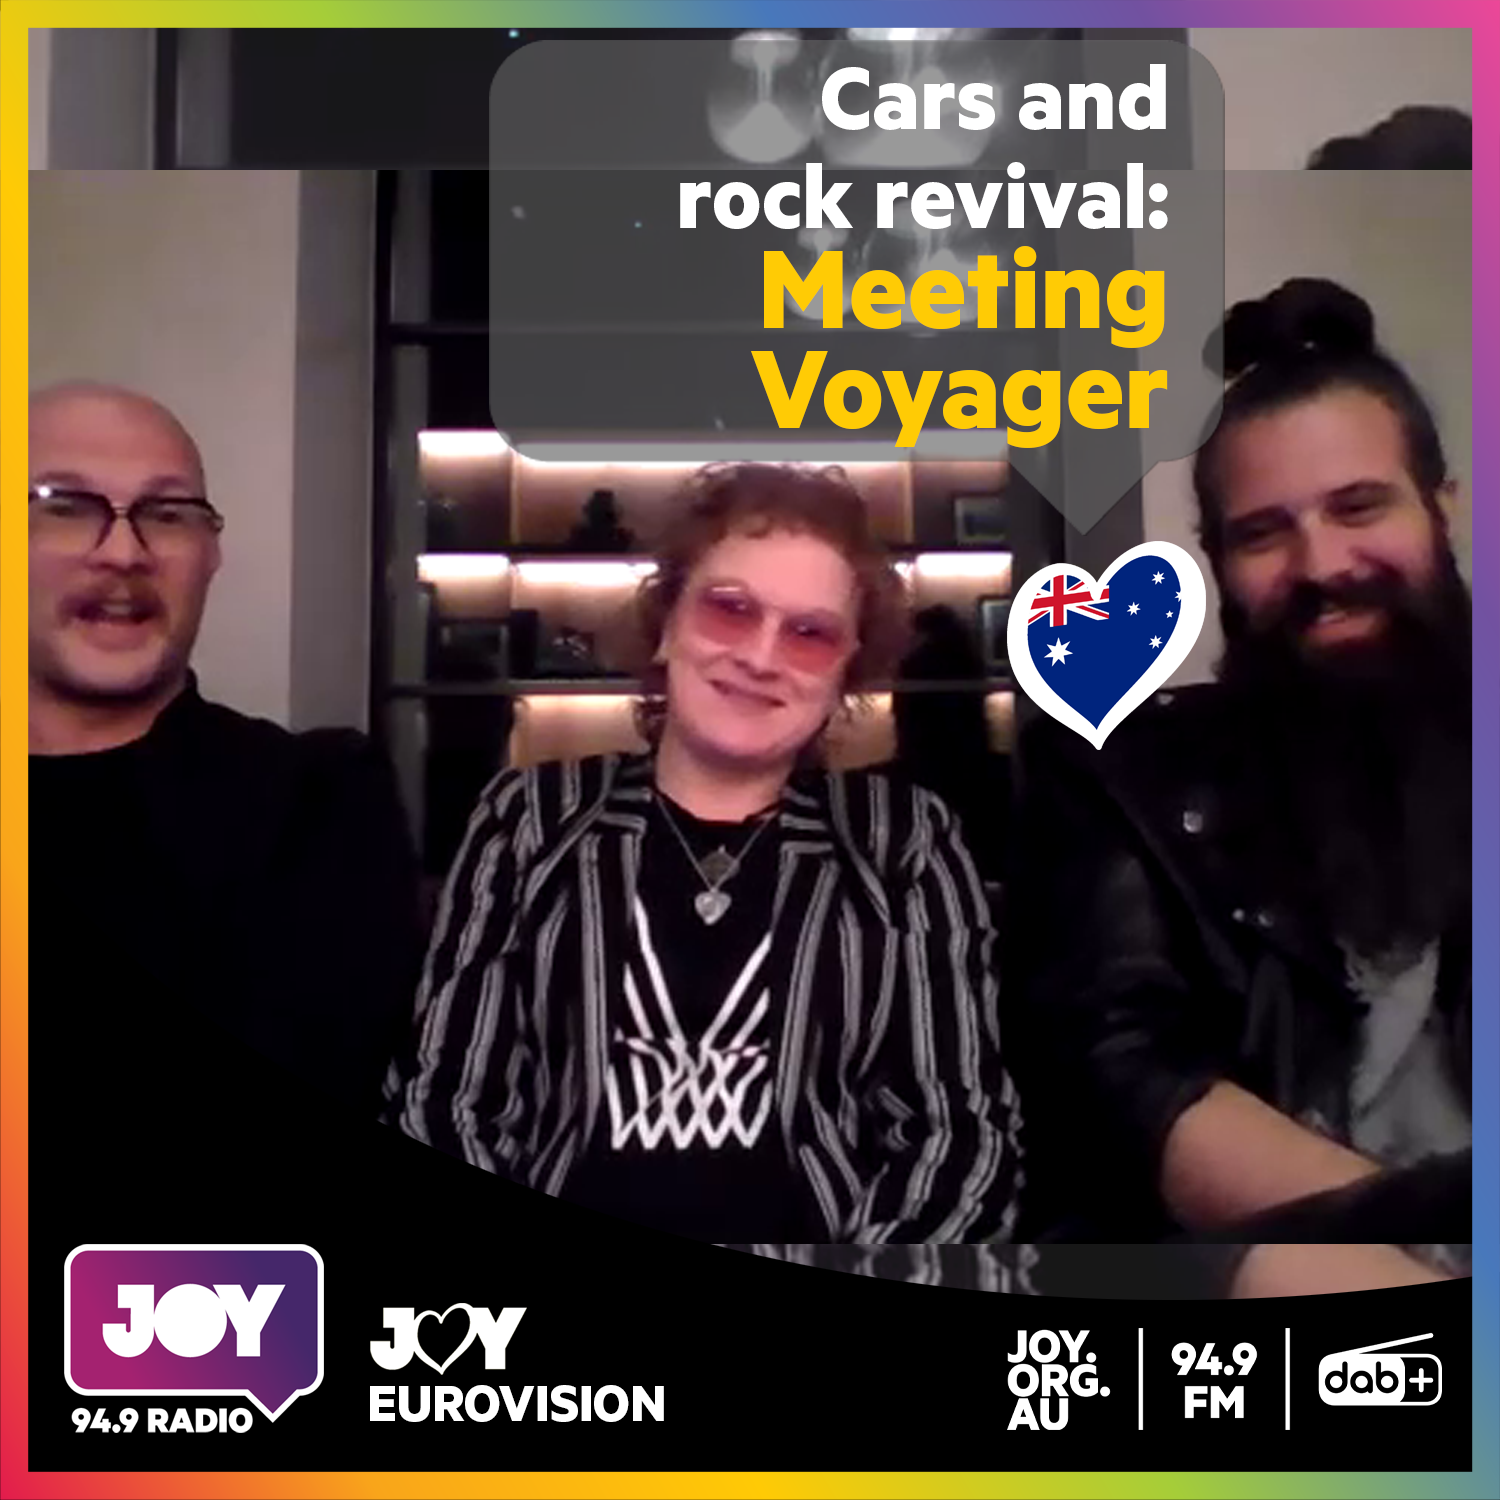 🇦🇺 Cars and rock revival: Meeting Voyager